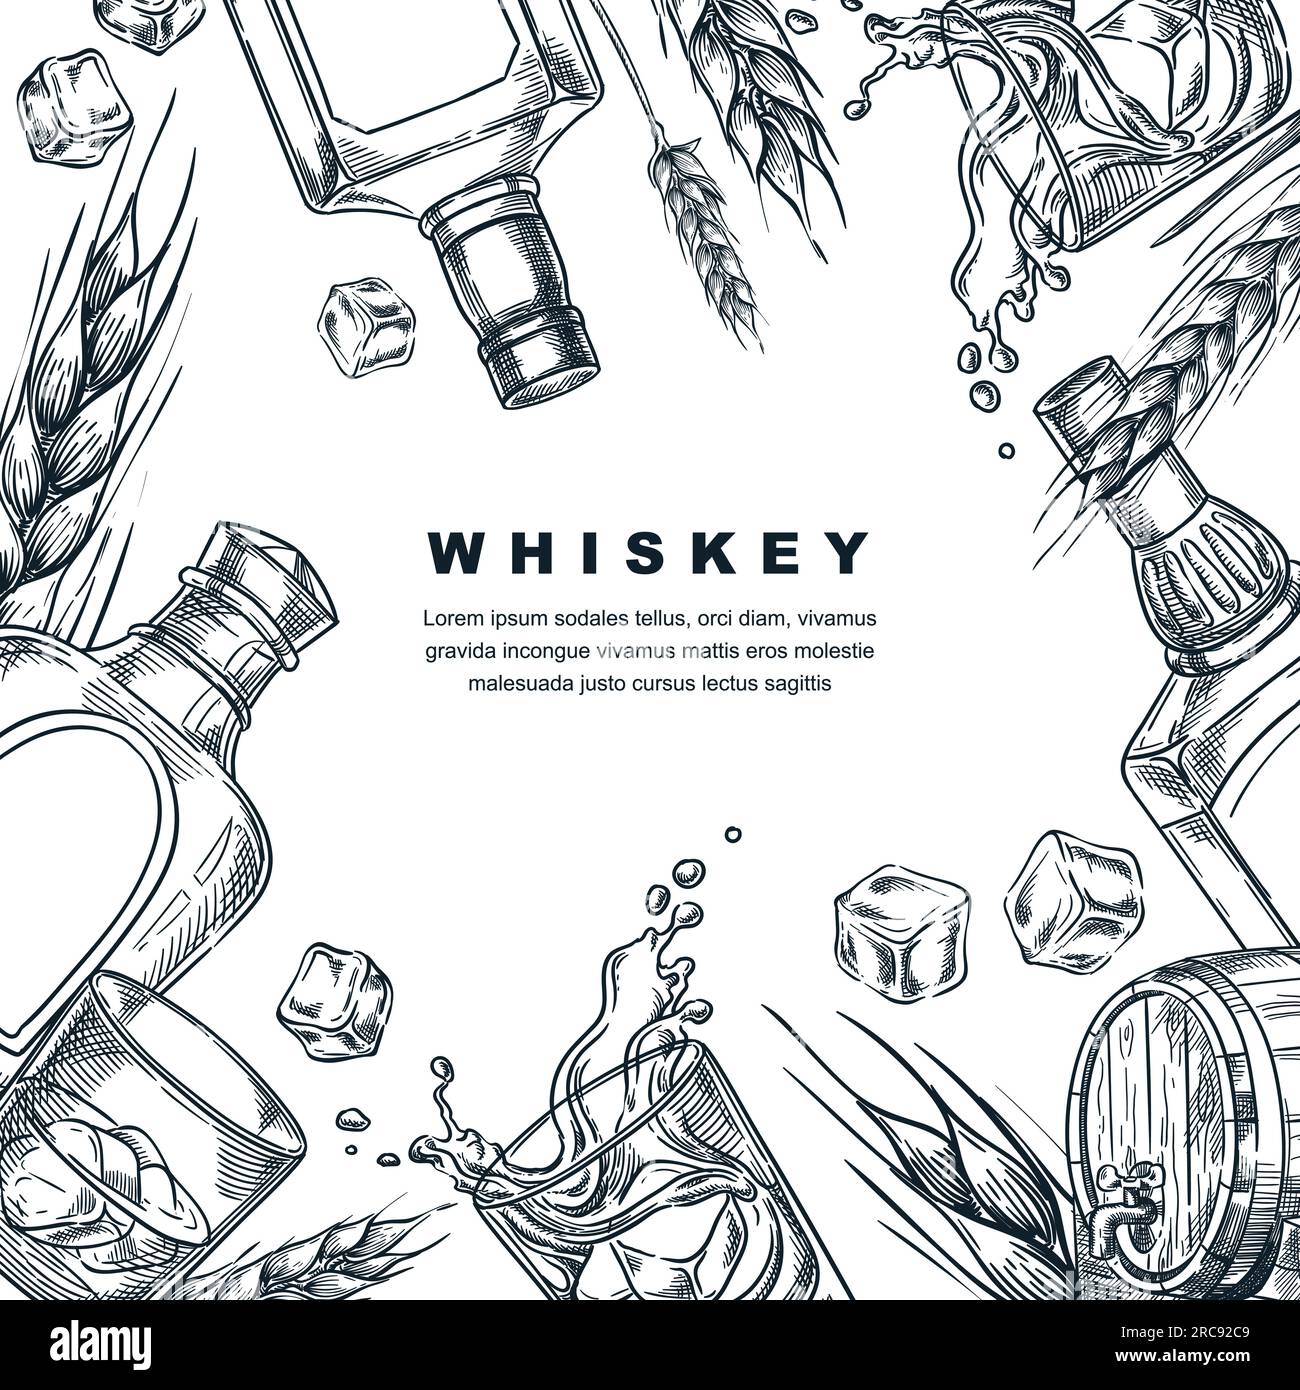 Whiskey tasting banner poster party flyer. Vector sketch square frame illustration of whisky or brandy bottle, glasses, barley, wheat. Winery alcohol Stock Vector